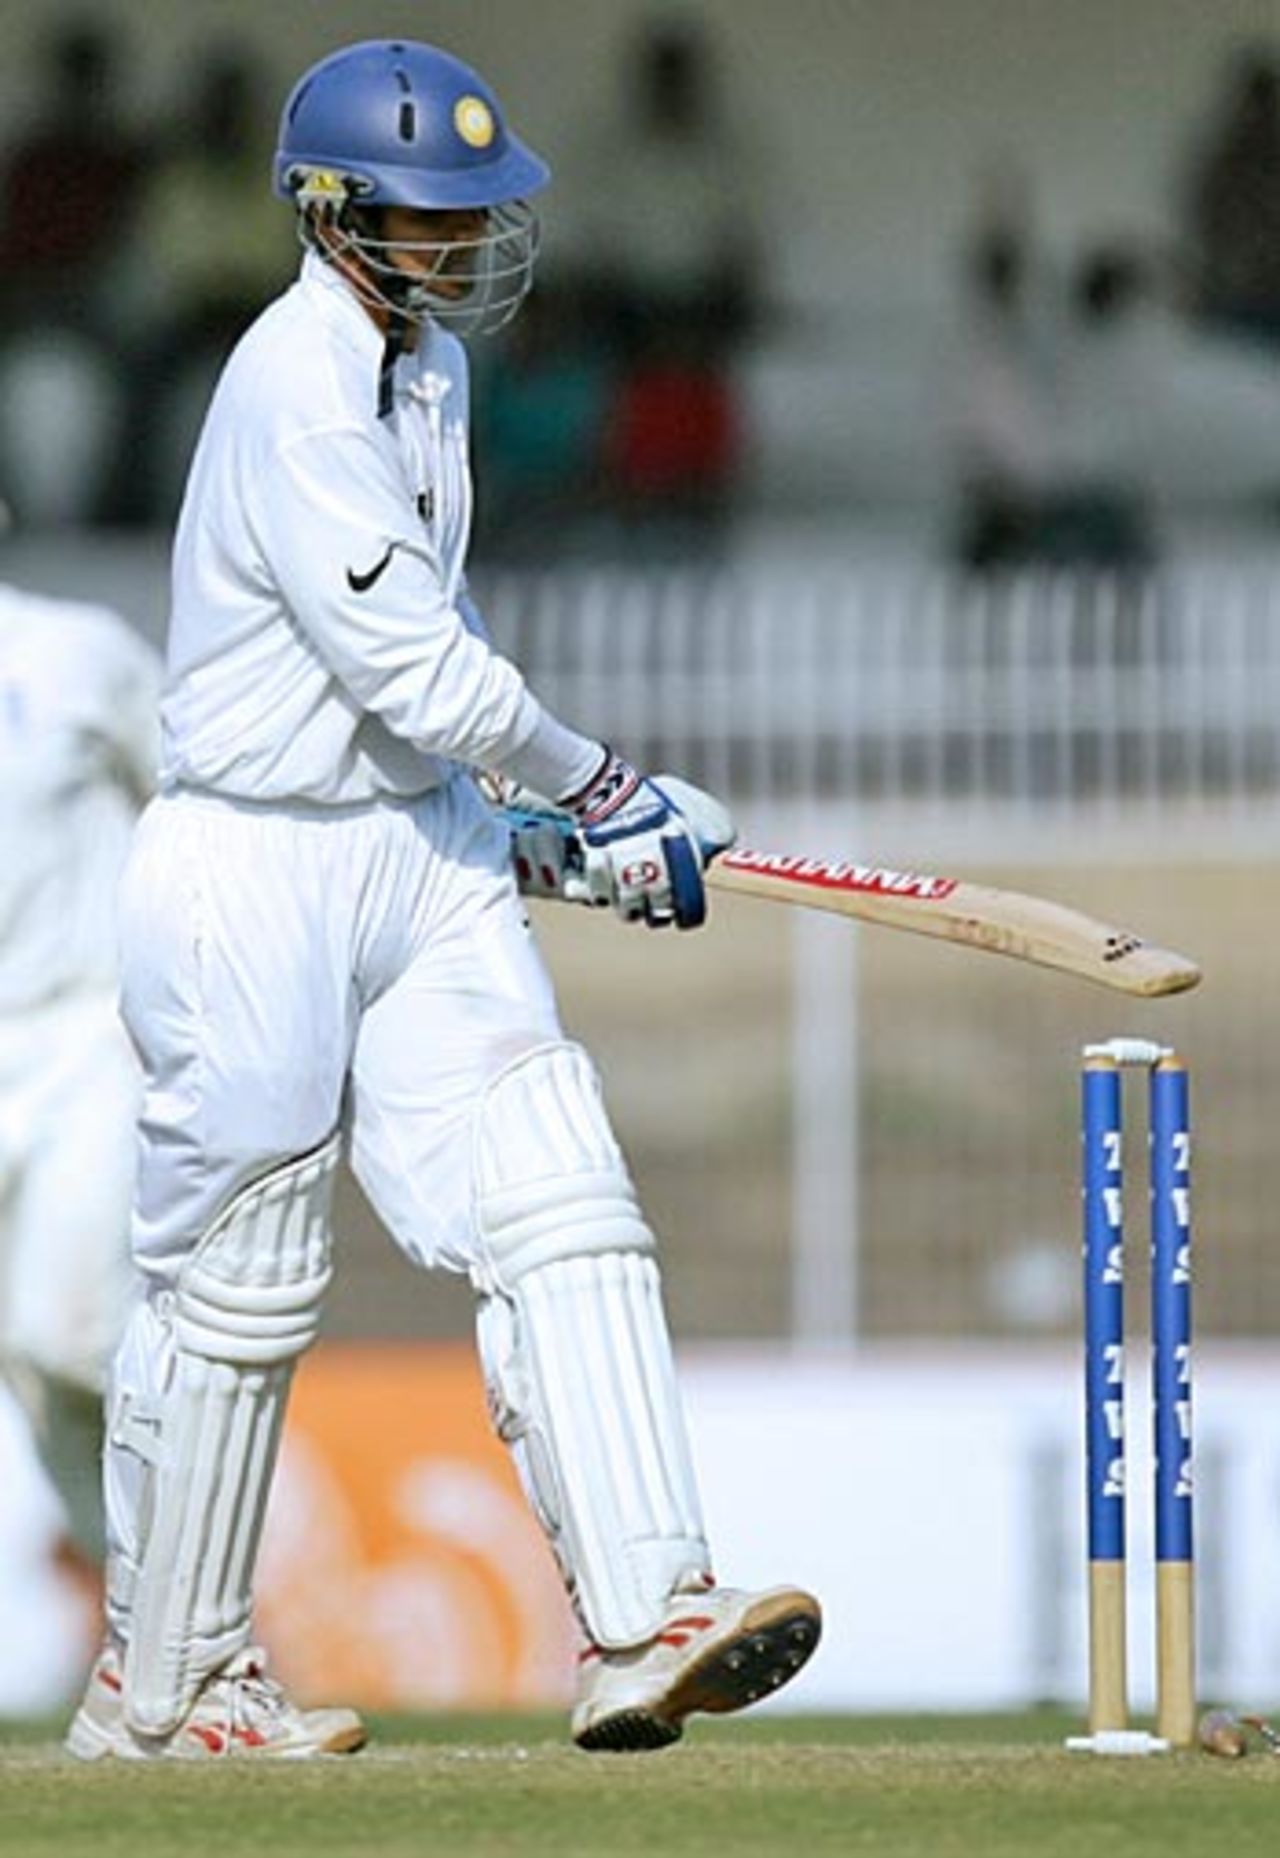 A clearly disappointed Rahul Dravid is bowled by Monty Panesar, India v England, 1st Test, Nagpur, March 5, 2006